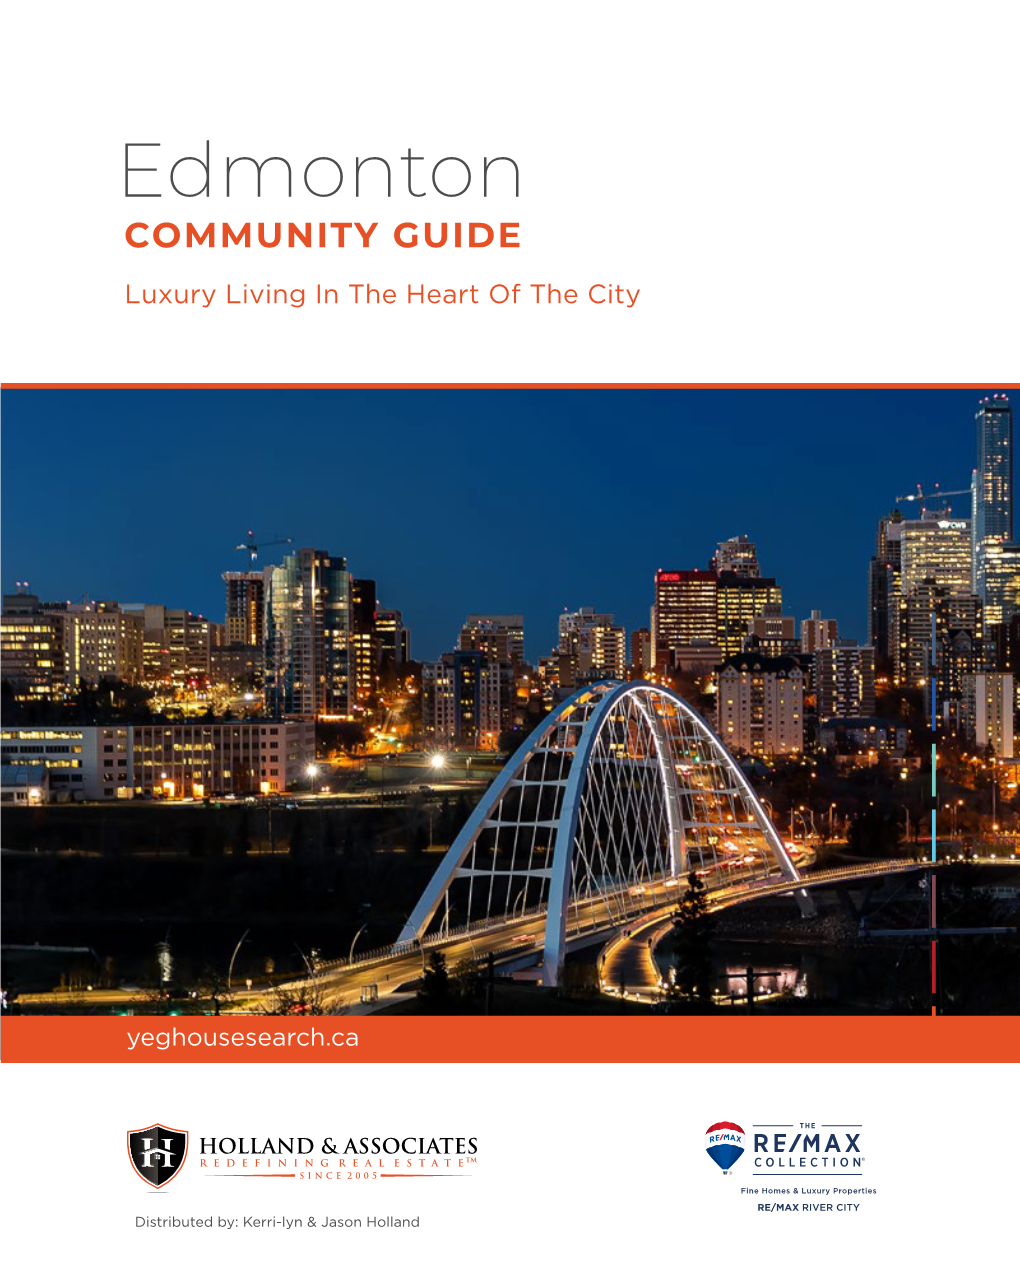 Edmonton COMMUNITY GUIDE Luxury Living in the Heart of the City